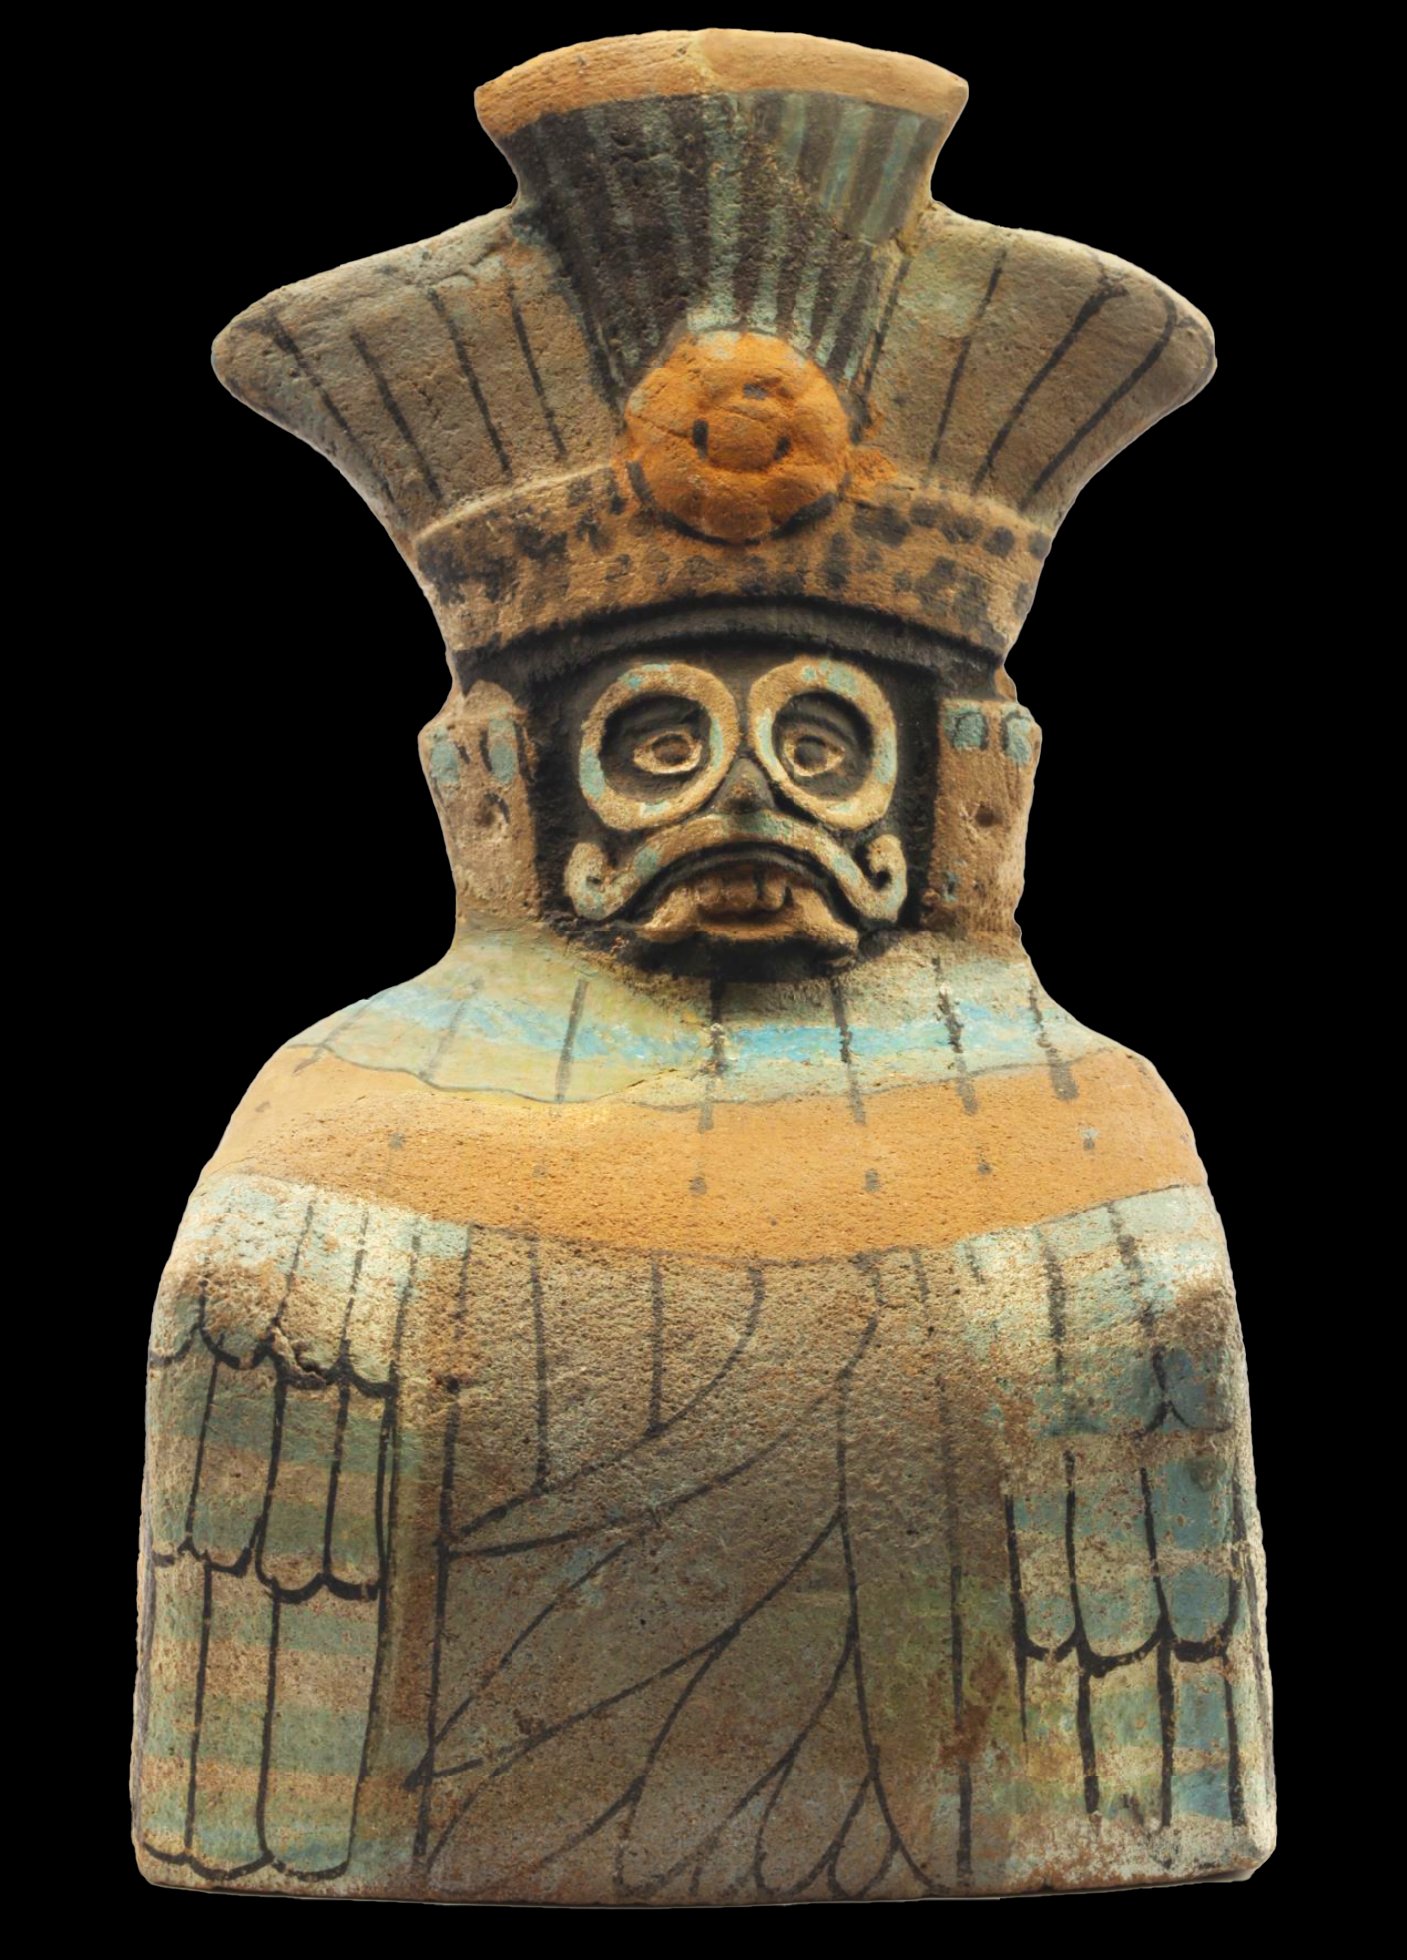 Ancient Toltec figurine featuring a detailed face with prominent eyes and mustache, wearing a large headdress with a central orange ornament. The pottery figure has intricate patterns and faint blue and brown hues.